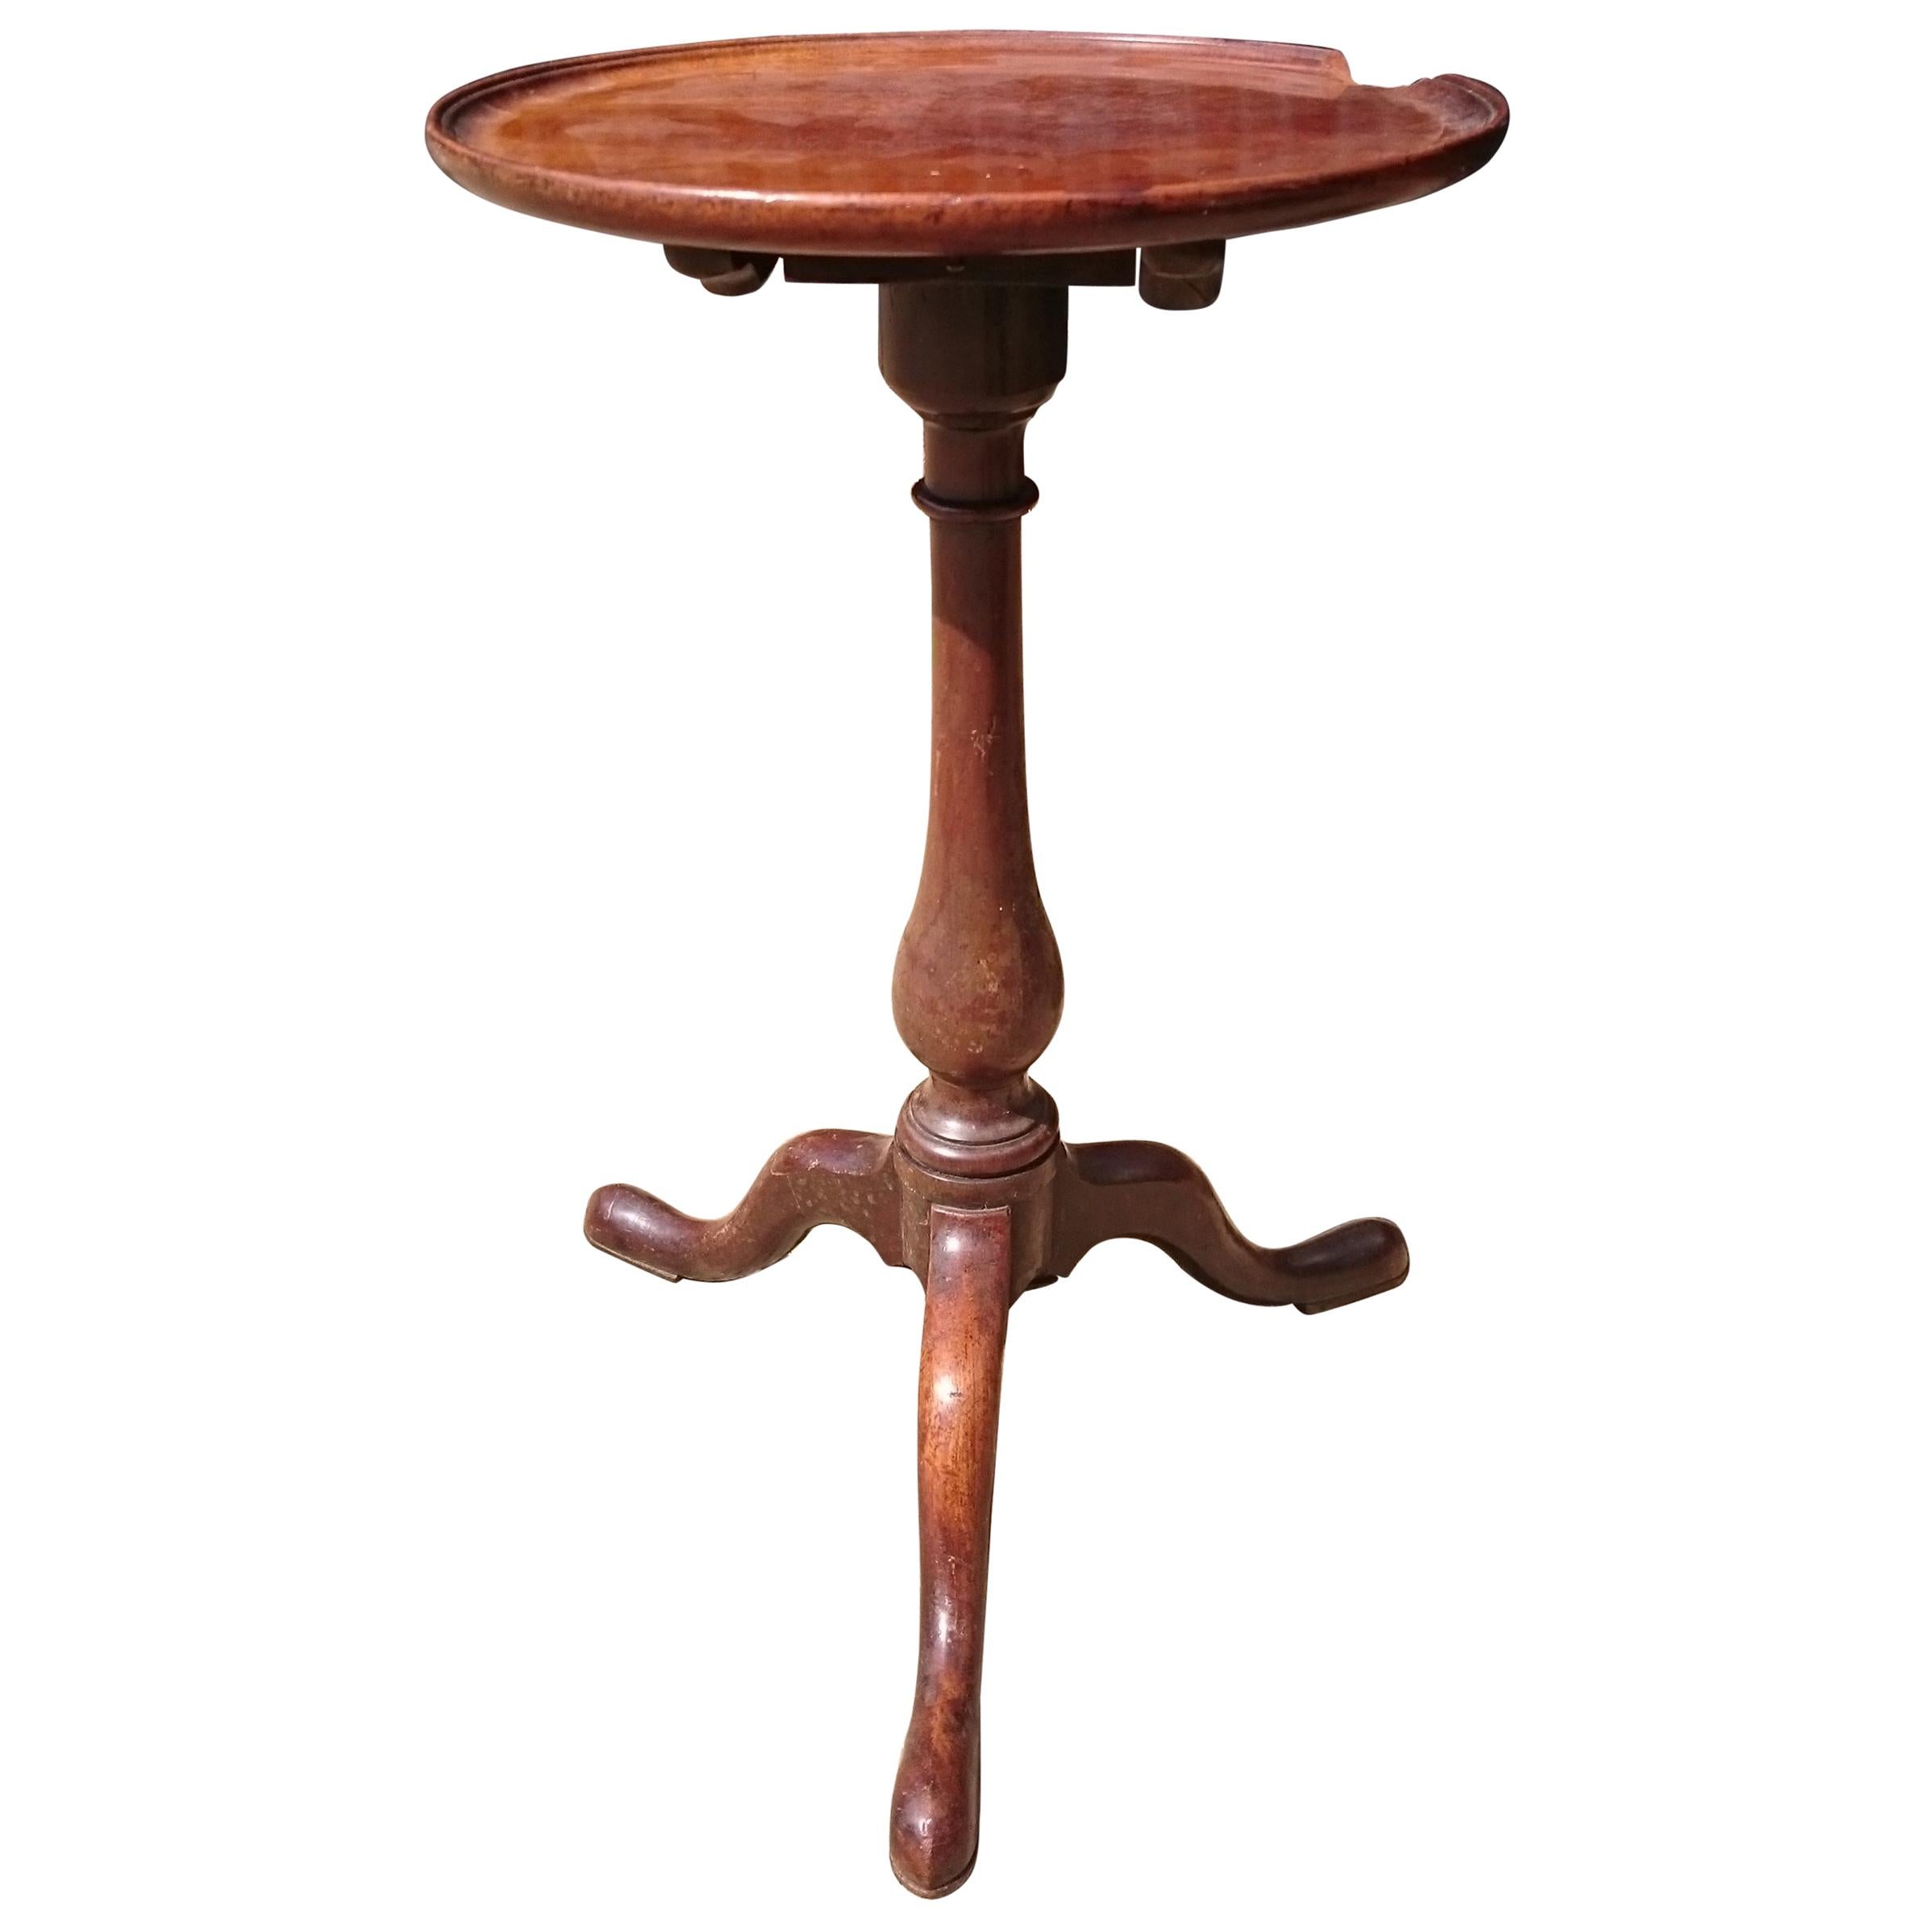 18th Century George III Period Mahogany Antique Wine Table or Tripod Table